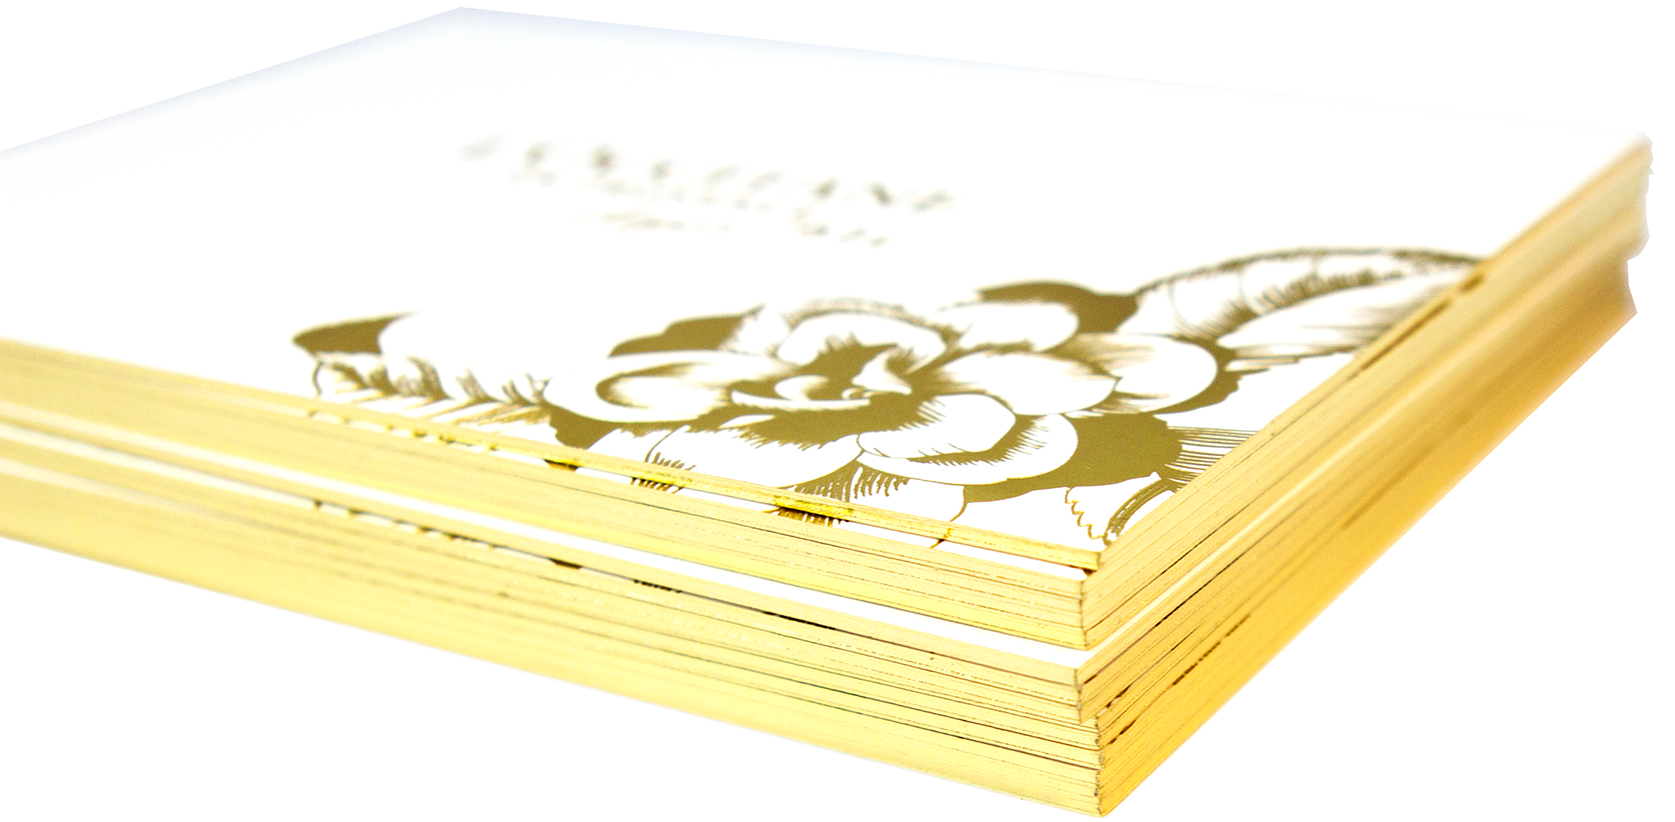 upmarket custom printed invites, with gold foil and gold gilded edges